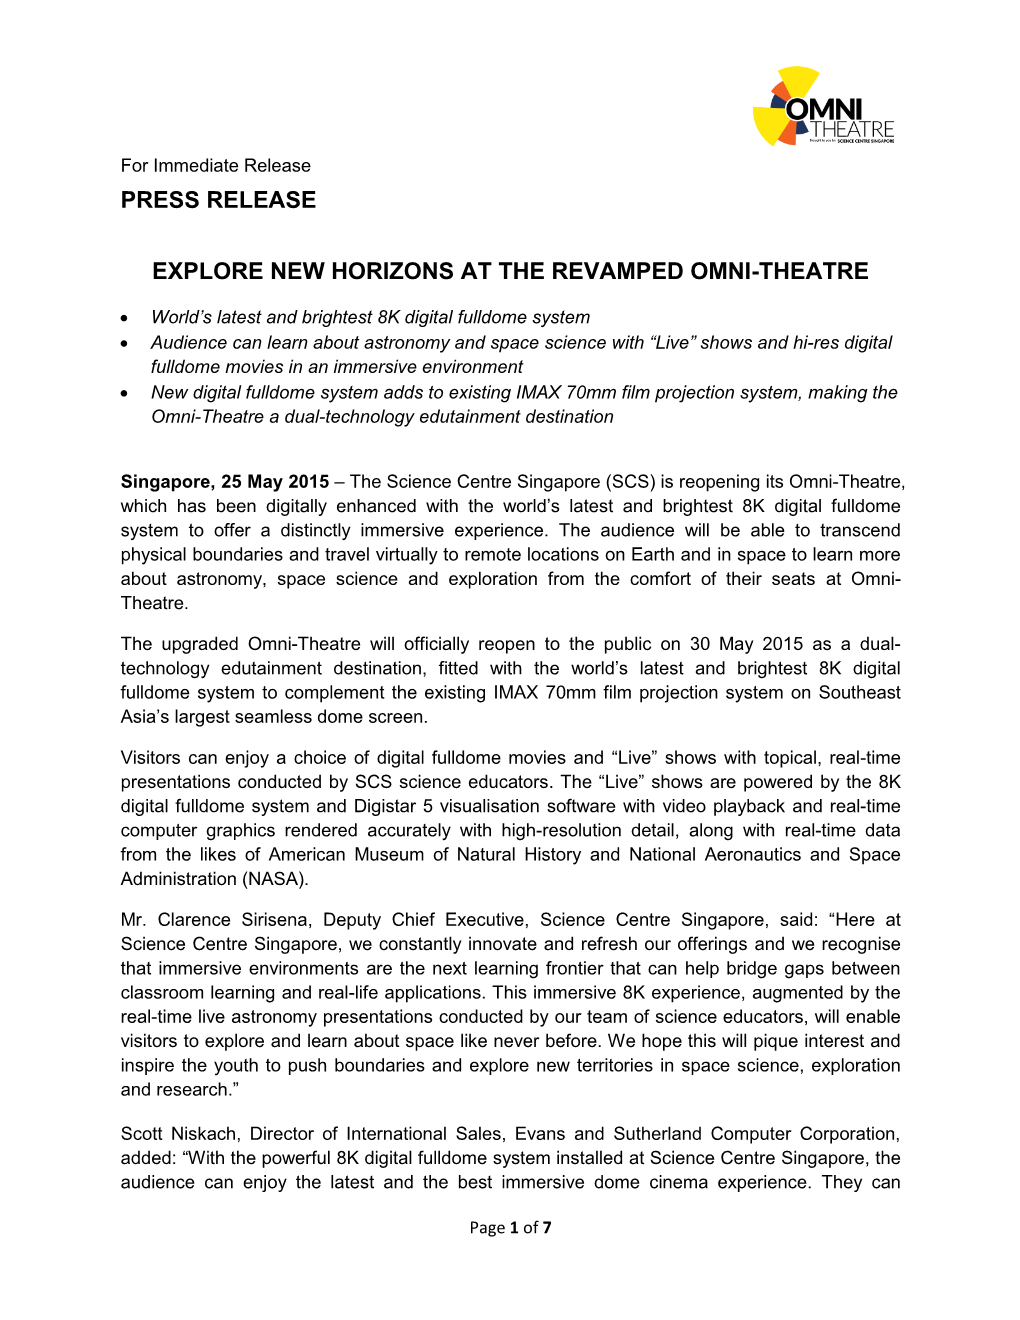 Press Release Explore New Horizons at the Revamped Omni-Theatre